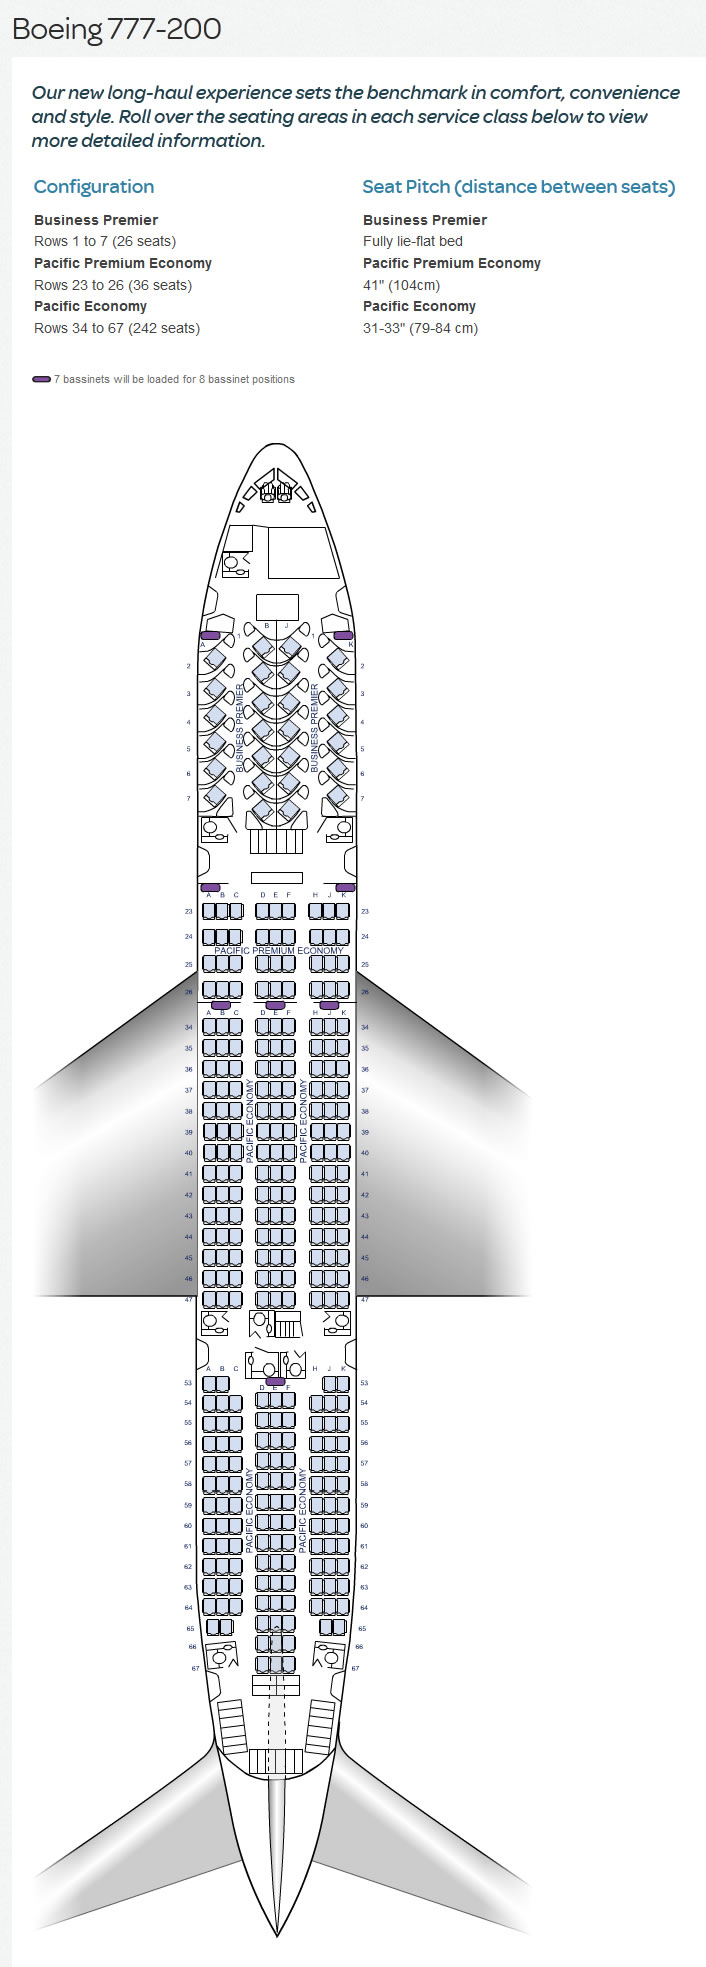 AIR NEW ZEALAND AIRLINES BOEING 777-200 AIRCRAFT SEATING CHART